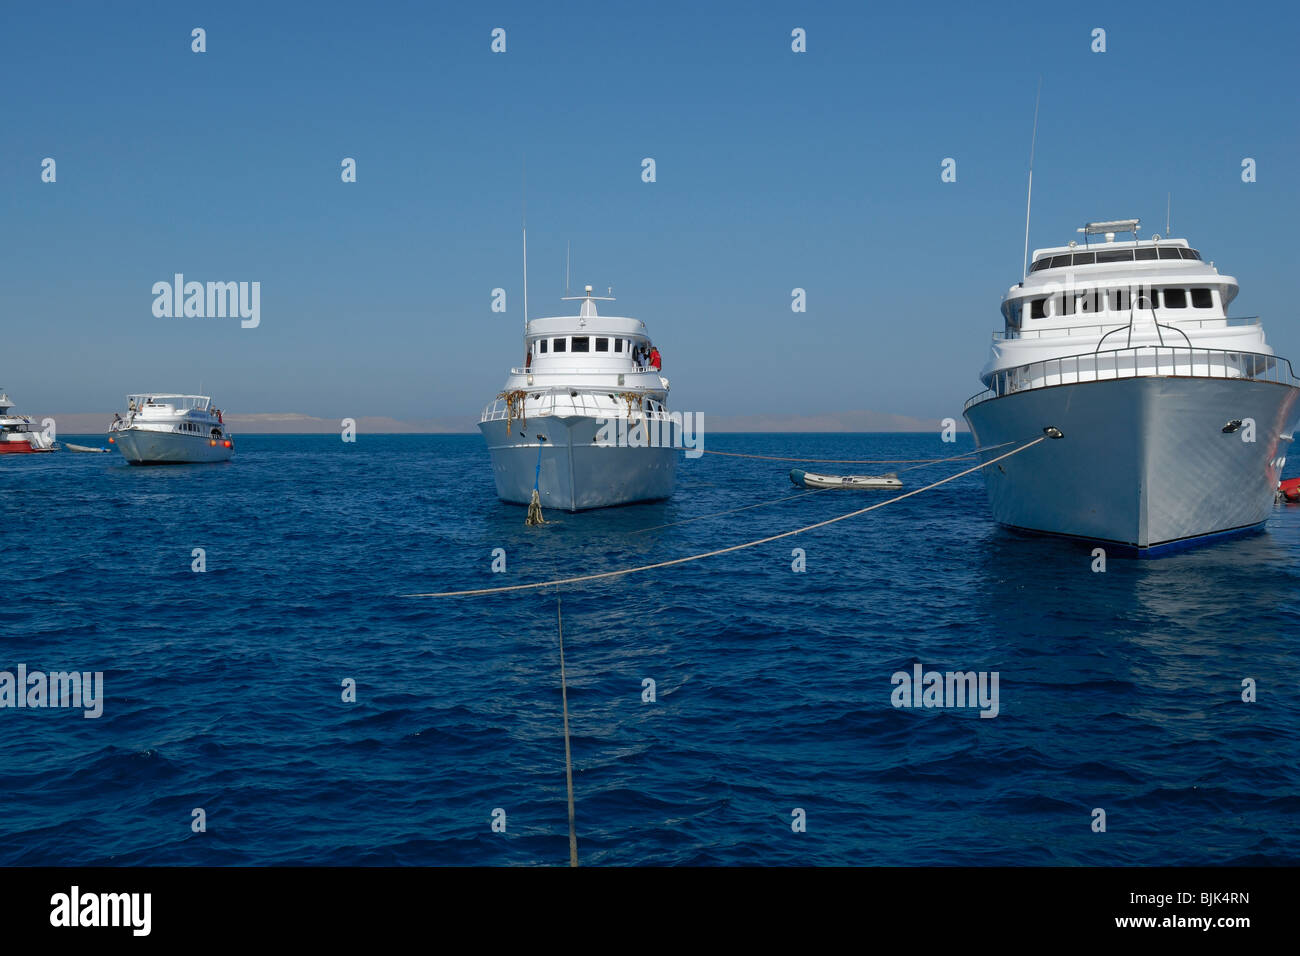 Diving boats in Red Sea off coast of Egypt Stock Photo